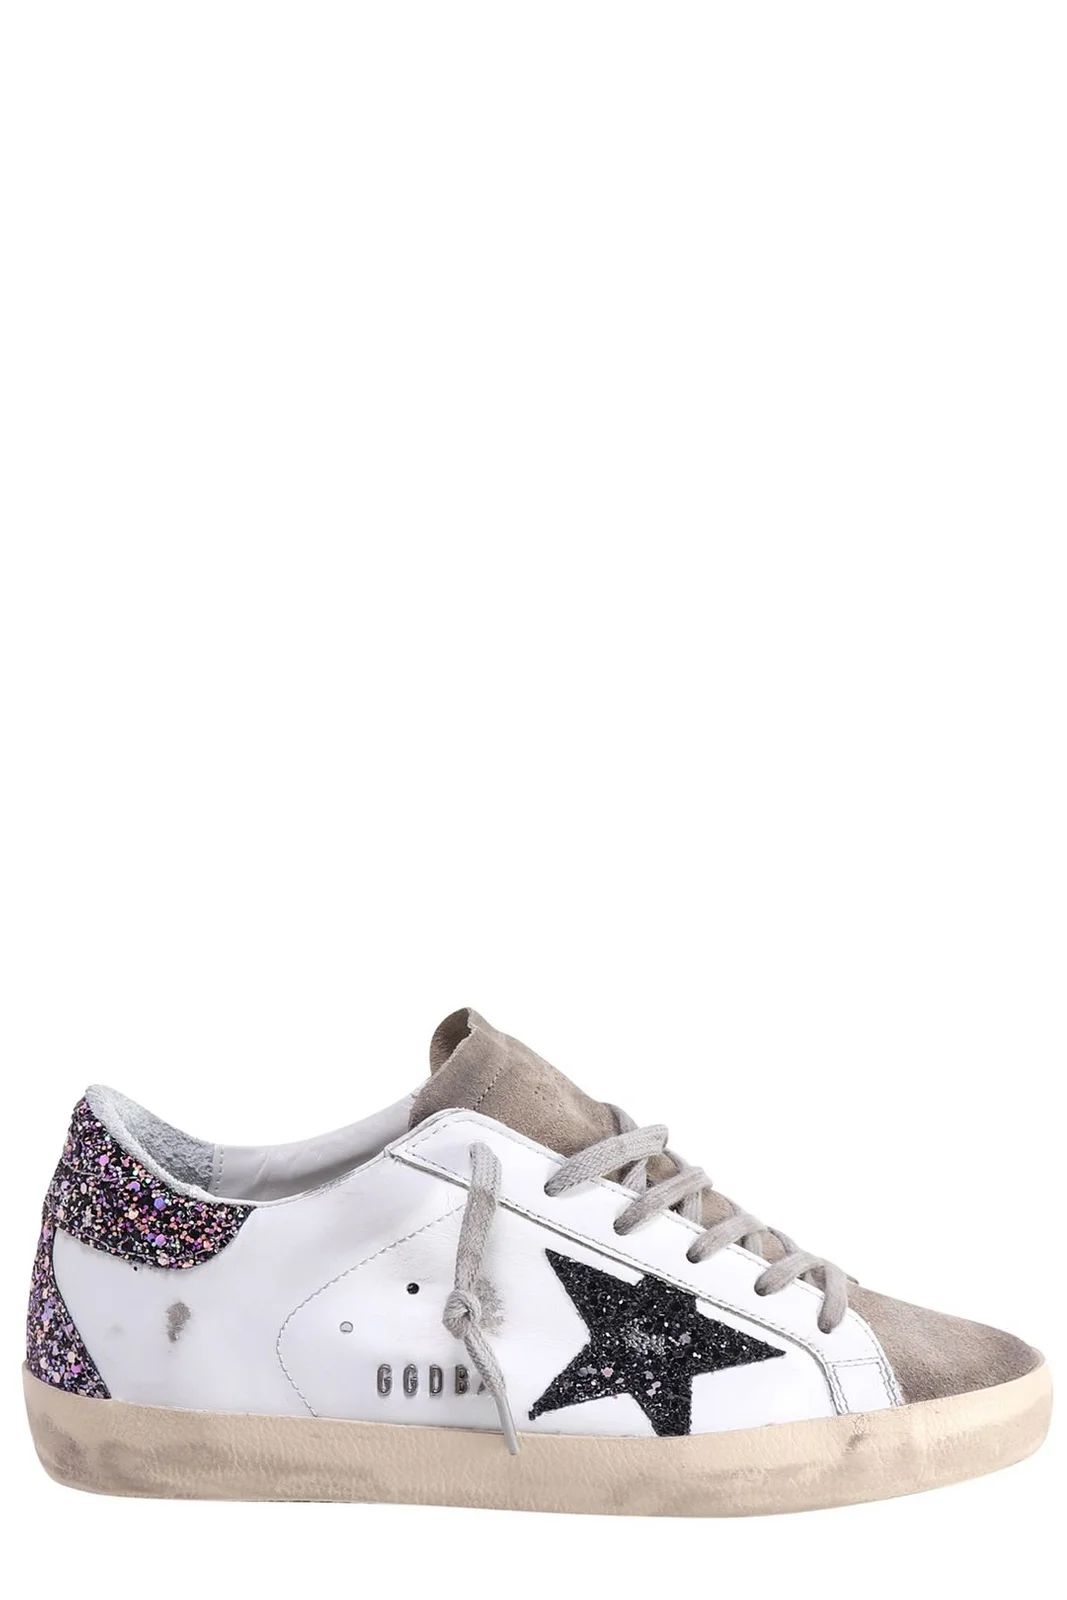 Golden Goose Deluxe Brand Superstar Glitter-Detail Lace-Up Sneakers | Cettire Global